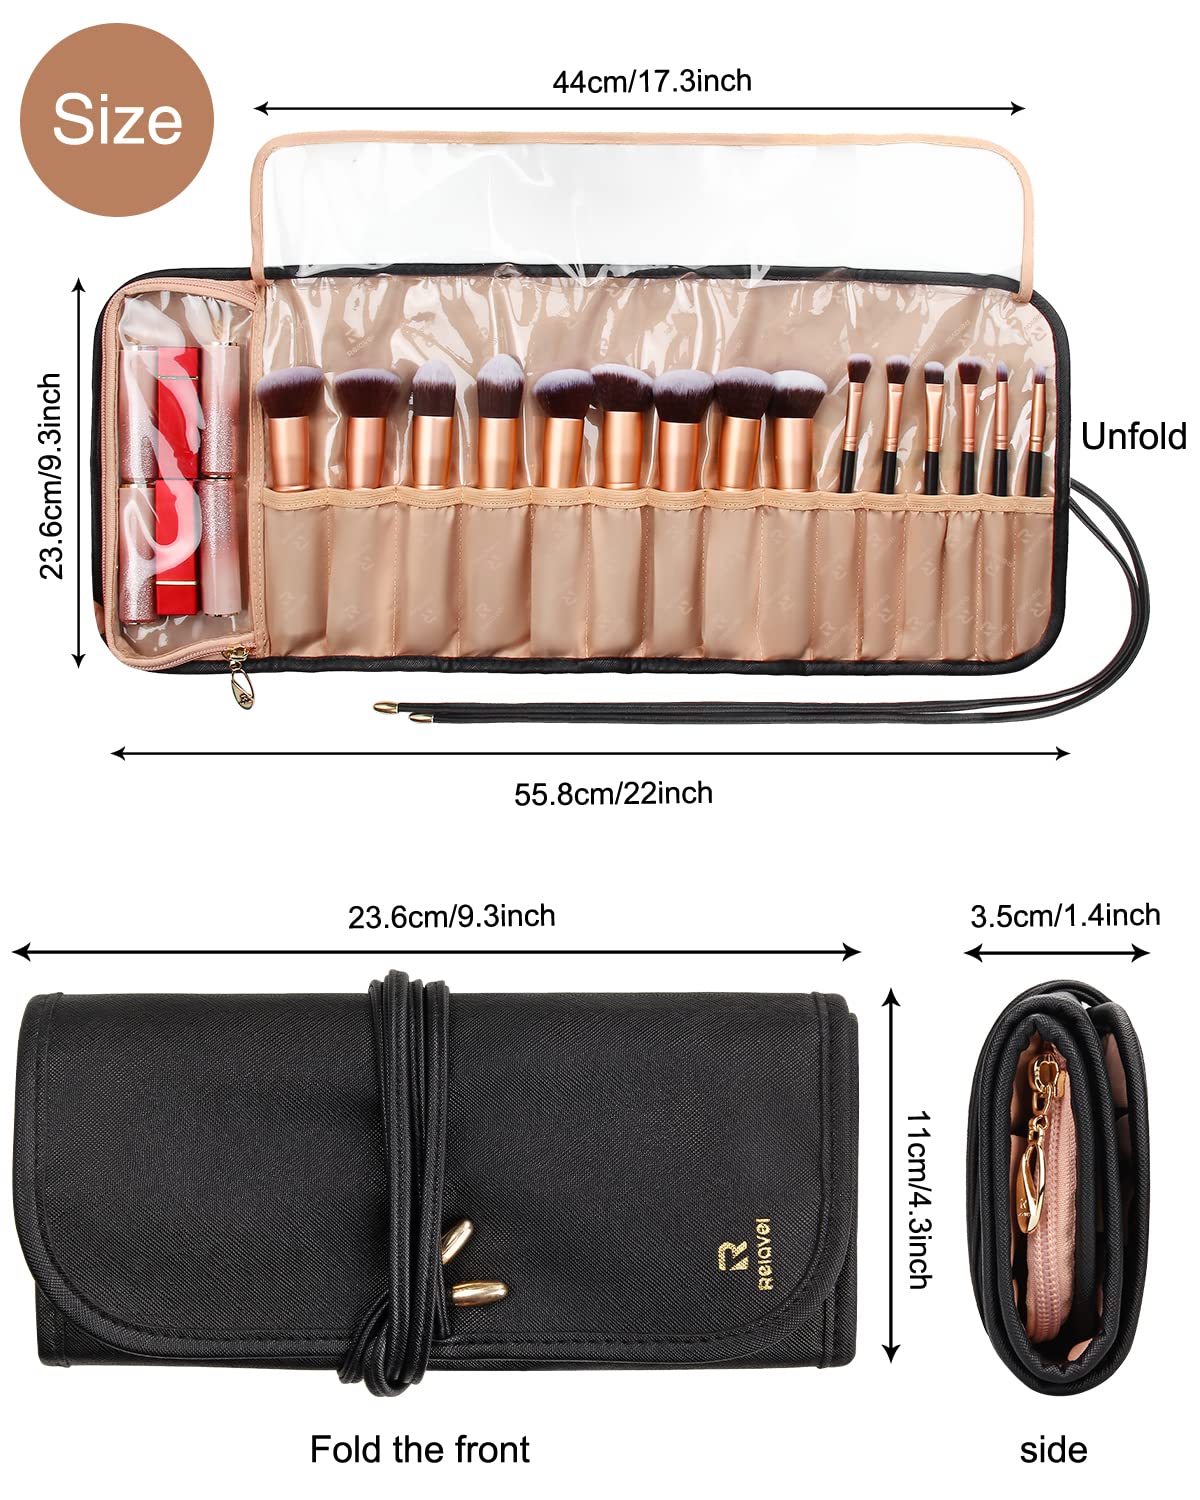 Relavel Makeup Brush Rolling Case Makeup Brush Bag Pouch Holder Cosmetic Bag Organizer Travel Portable Cosmetics Brushes Black Leather Case with Small Clear Bag